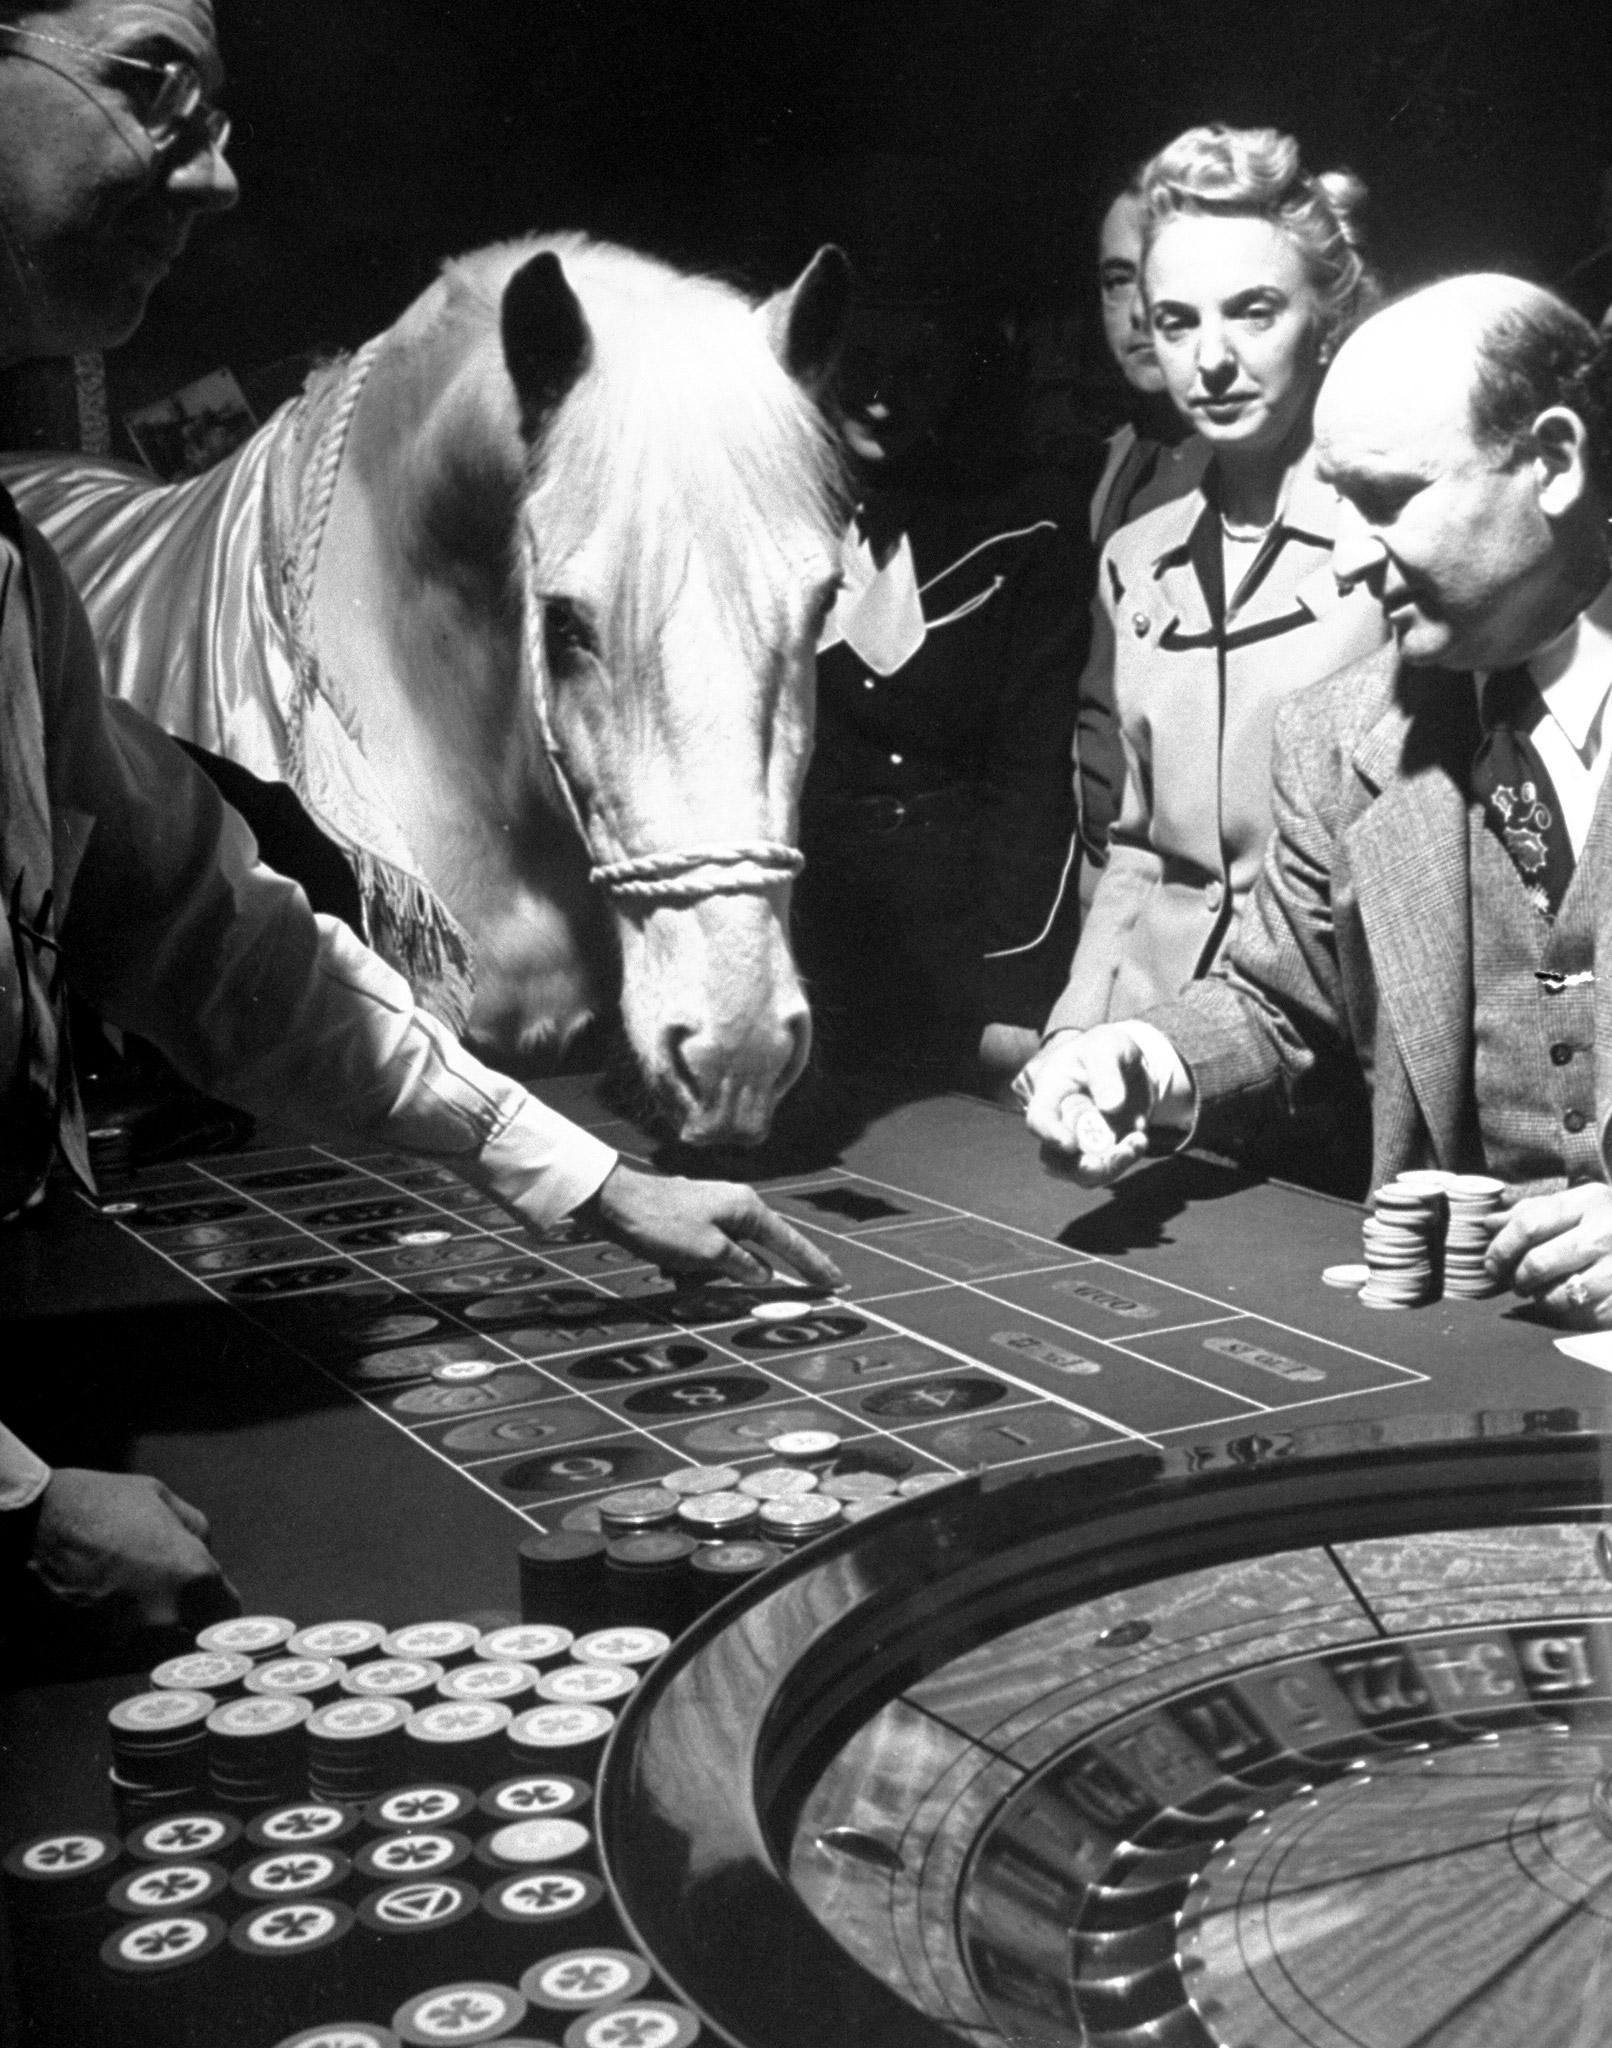 Lucky horse playing roulette in Las Vegas, 1947.